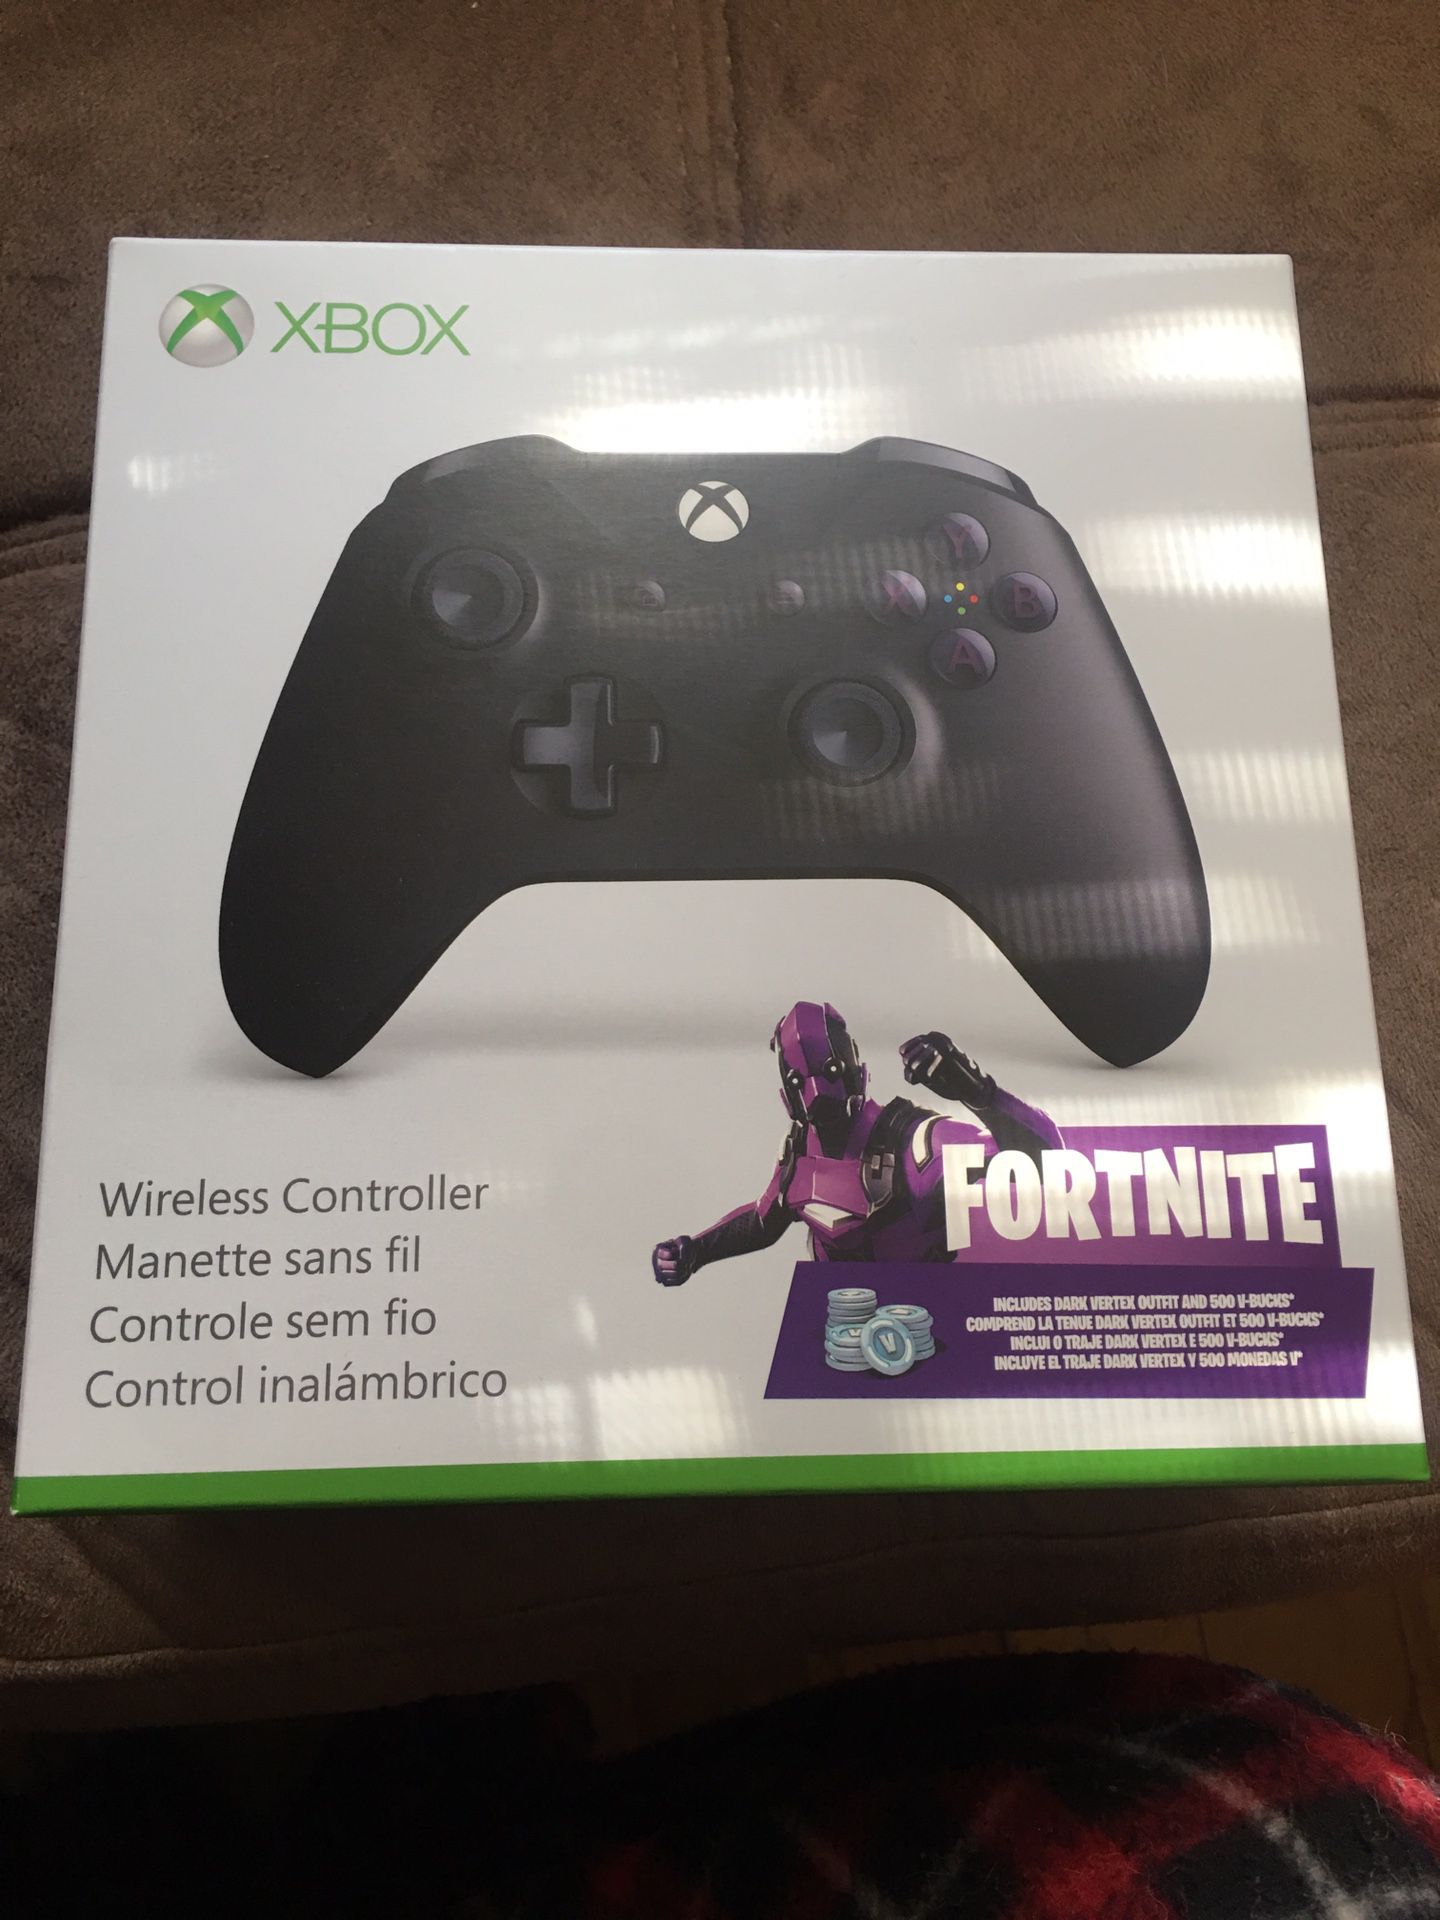 Fortnite edition Xbox one controller